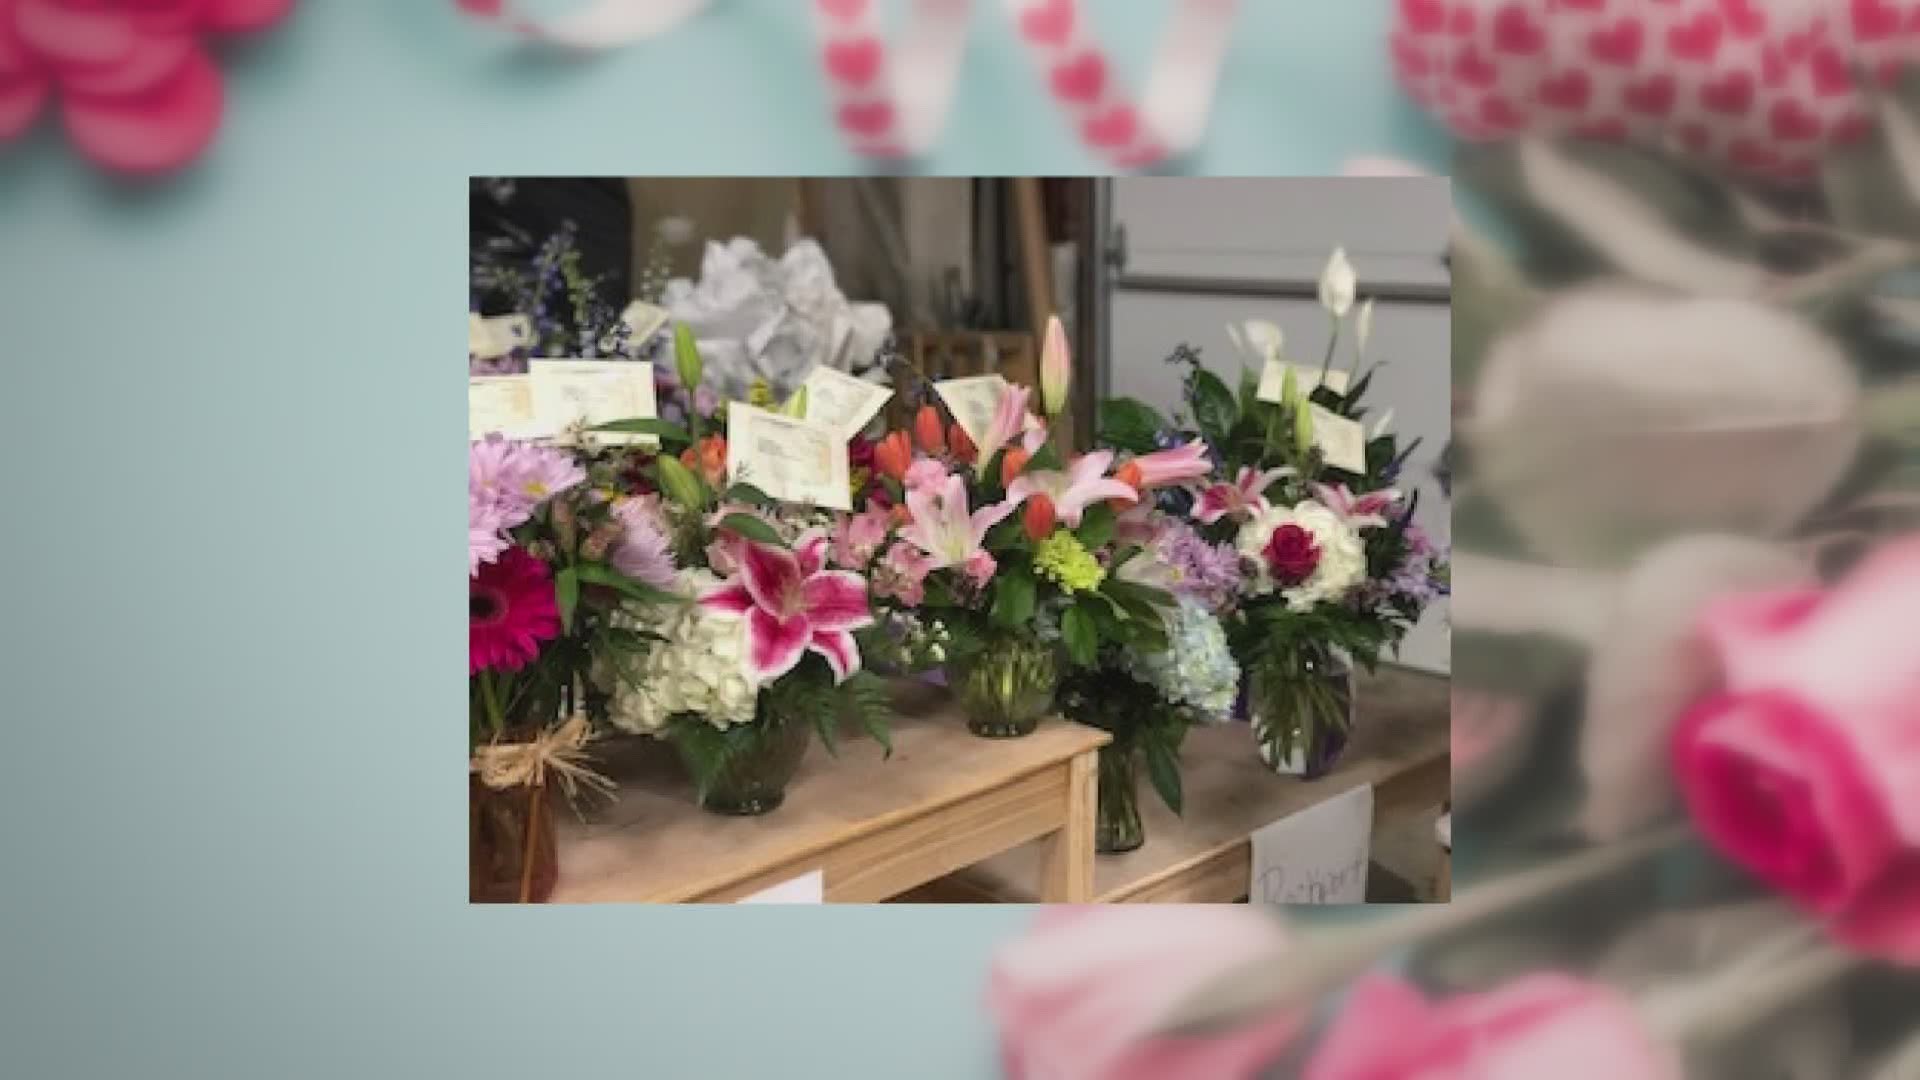 Deliveries blossom this year for florists, especially with the current pandemic.